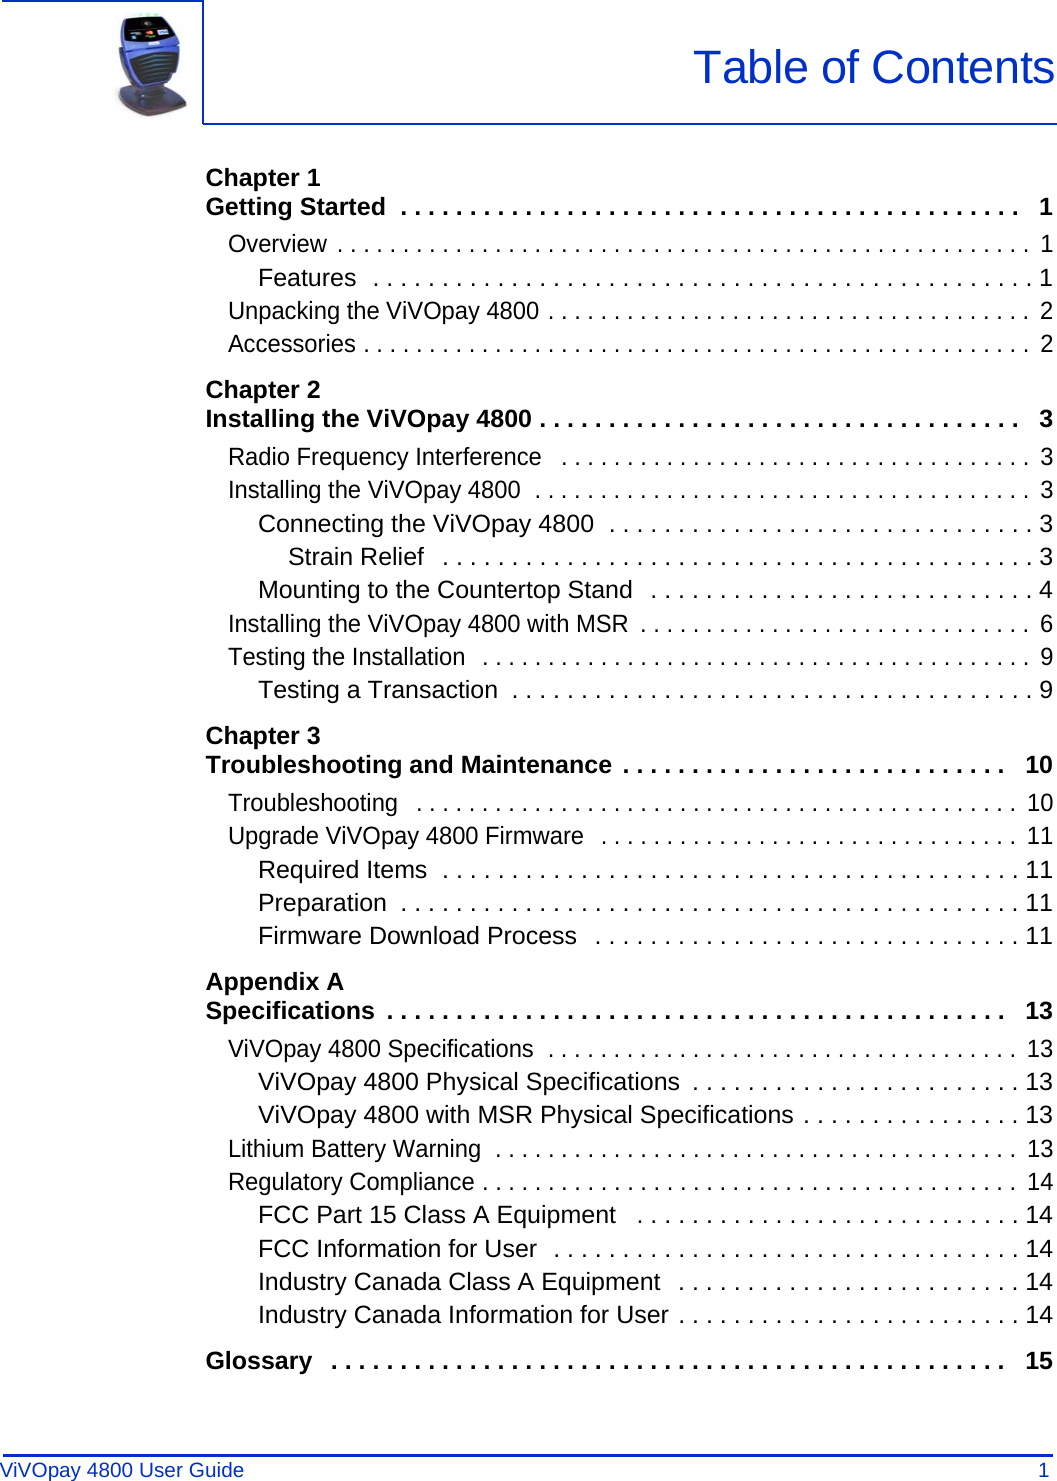 ViVOpay 4800 User Guide 1               Chapter 1Getting Started  . . . . . . . . . . . . . . . . . . . . . . . . . . . . . . . . . . . . . . . . . . . . .   1Overview . . . . . . . . . . . . . . . . . . . . . . . . . . . . . . . . . . . . . . . . . . . . . . . . . . . . .  1Features  . . . . . . . . . . . . . . . . . . . . . . . . . . . . . . . . . . . . . . . . . . . . . . . . 1Unpacking the ViVOpay 4800 . . . . . . . . . . . . . . . . . . . . . . . . . . . . . . . . . . . . .  2Accessories . . . . . . . . . . . . . . . . . . . . . . . . . . . . . . . . . . . . . . . . . . . . . . . . . . .  2Chapter 2Installing the ViVOpay 4800 . . . . . . . . . . . . . . . . . . . . . . . . . . . . . . . . . . .   3Radio Frequency Interference   . . . . . . . . . . . . . . . . . . . . . . . . . . . . . . . . . . . .  3Installing the ViVOpay 4800  . . . . . . . . . . . . . . . . . . . . . . . . . . . . . . . . . . . . . .  3Connecting the ViVOpay 4800  . . . . . . . . . . . . . . . . . . . . . . . . . . . . . . . 3Strain Relief   . . . . . . . . . . . . . . . . . . . . . . . . . . . . . . . . . . . . . . . . . . . 3Mounting to the Countertop Stand  . . . . . . . . . . . . . . . . . . . . . . . . . . . . 4Installing the ViVOpay 4800 with MSR  . . . . . . . . . . . . . . . . . . . . . . . . . . . . . .  6Testing the Installation  . . . . . . . . . . . . . . . . . . . . . . . . . . . . . . . . . . . . . . . . . .  9Testing a Transaction  . . . . . . . . . . . . . . . . . . . . . . . . . . . . . . . . . . . . . . 9Chapter 3Troubleshooting and Maintenance . . . . . . . . . . . . . . . . . . . . . . . . . . . .   10Troubleshooting   . . . . . . . . . . . . . . . . . . . . . . . . . . . . . . . . . . . . . . . . . . . . . .  10Upgrade ViVOpay 4800 Firmware  . . . . . . . . . . . . . . . . . . . . . . . . . . . . . . . .  11Required Items  . . . . . . . . . . . . . . . . . . . . . . . . . . . . . . . . . . . . . . . . . . 11Preparation  . . . . . . . . . . . . . . . . . . . . . . . . . . . . . . . . . . . . . . . . . . . . . 11Firmware Download Process  . . . . . . . . . . . . . . . . . . . . . . . . . . . . . . . 11Appendix ASpecifications  . . . . . . . . . . . . . . . . . . . . . . . . . . . . . . . . . . . . . . . . . . . . .   13ViVOpay 4800 Specifications  . . . . . . . . . . . . . . . . . . . . . . . . . . . . . . . . . . . .  13ViVOpay 4800 Physical Specifications  . . . . . . . . . . . . . . . . . . . . . . . . 13ViVOpay 4800 with MSR Physical Specifications . . . . . . . . . . . . . . . . 13Lithium Battery Warning  . . . . . . . . . . . . . . . . . . . . . . . . . . . . . . . . . . . . . . . .  13Regulatory Compliance . . . . . . . . . . . . . . . . . . . . . . . . . . . . . . . . . . . . . . . . .  14FCC Part 15 Class A Equipment   . . . . . . . . . . . . . . . . . . . . . . . . . . . . 14FCC Information for User  . . . . . . . . . . . . . . . . . . . . . . . . . . . . . . . . . . 14Industry Canada Class A Equipment  . . . . . . . . . . . . . . . . . . . . . . . . . 14Industry Canada Information for User . . . . . . . . . . . . . . . . . . . . . . . . . 14Glossary   . . . . . . . . . . . . . . . . . . . . . . . . . . . . . . . . . . . . . . . . . . . . . . . . .   15Table of Contents